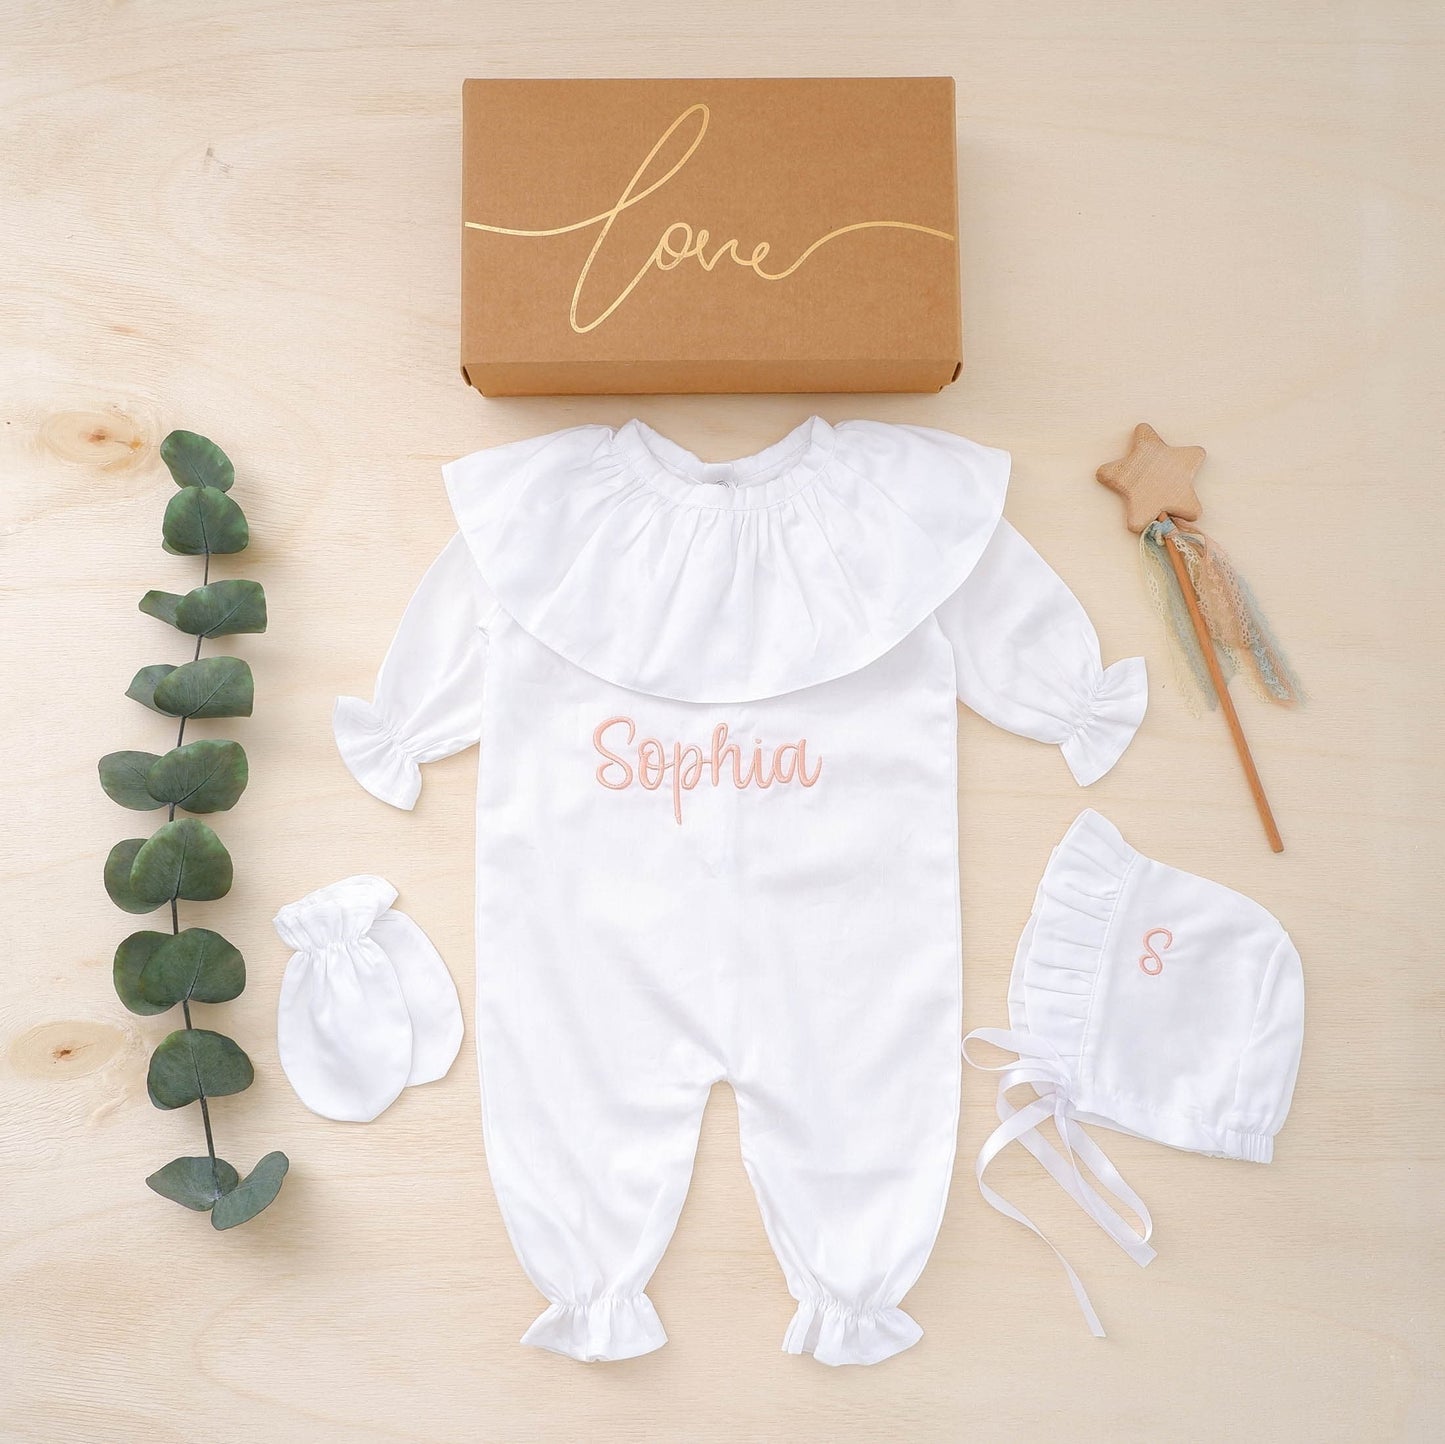 Personalized coming home outfit,Baby girl coming home outfit,Personalized gift for newborn,Customized baby girl hospital outfit